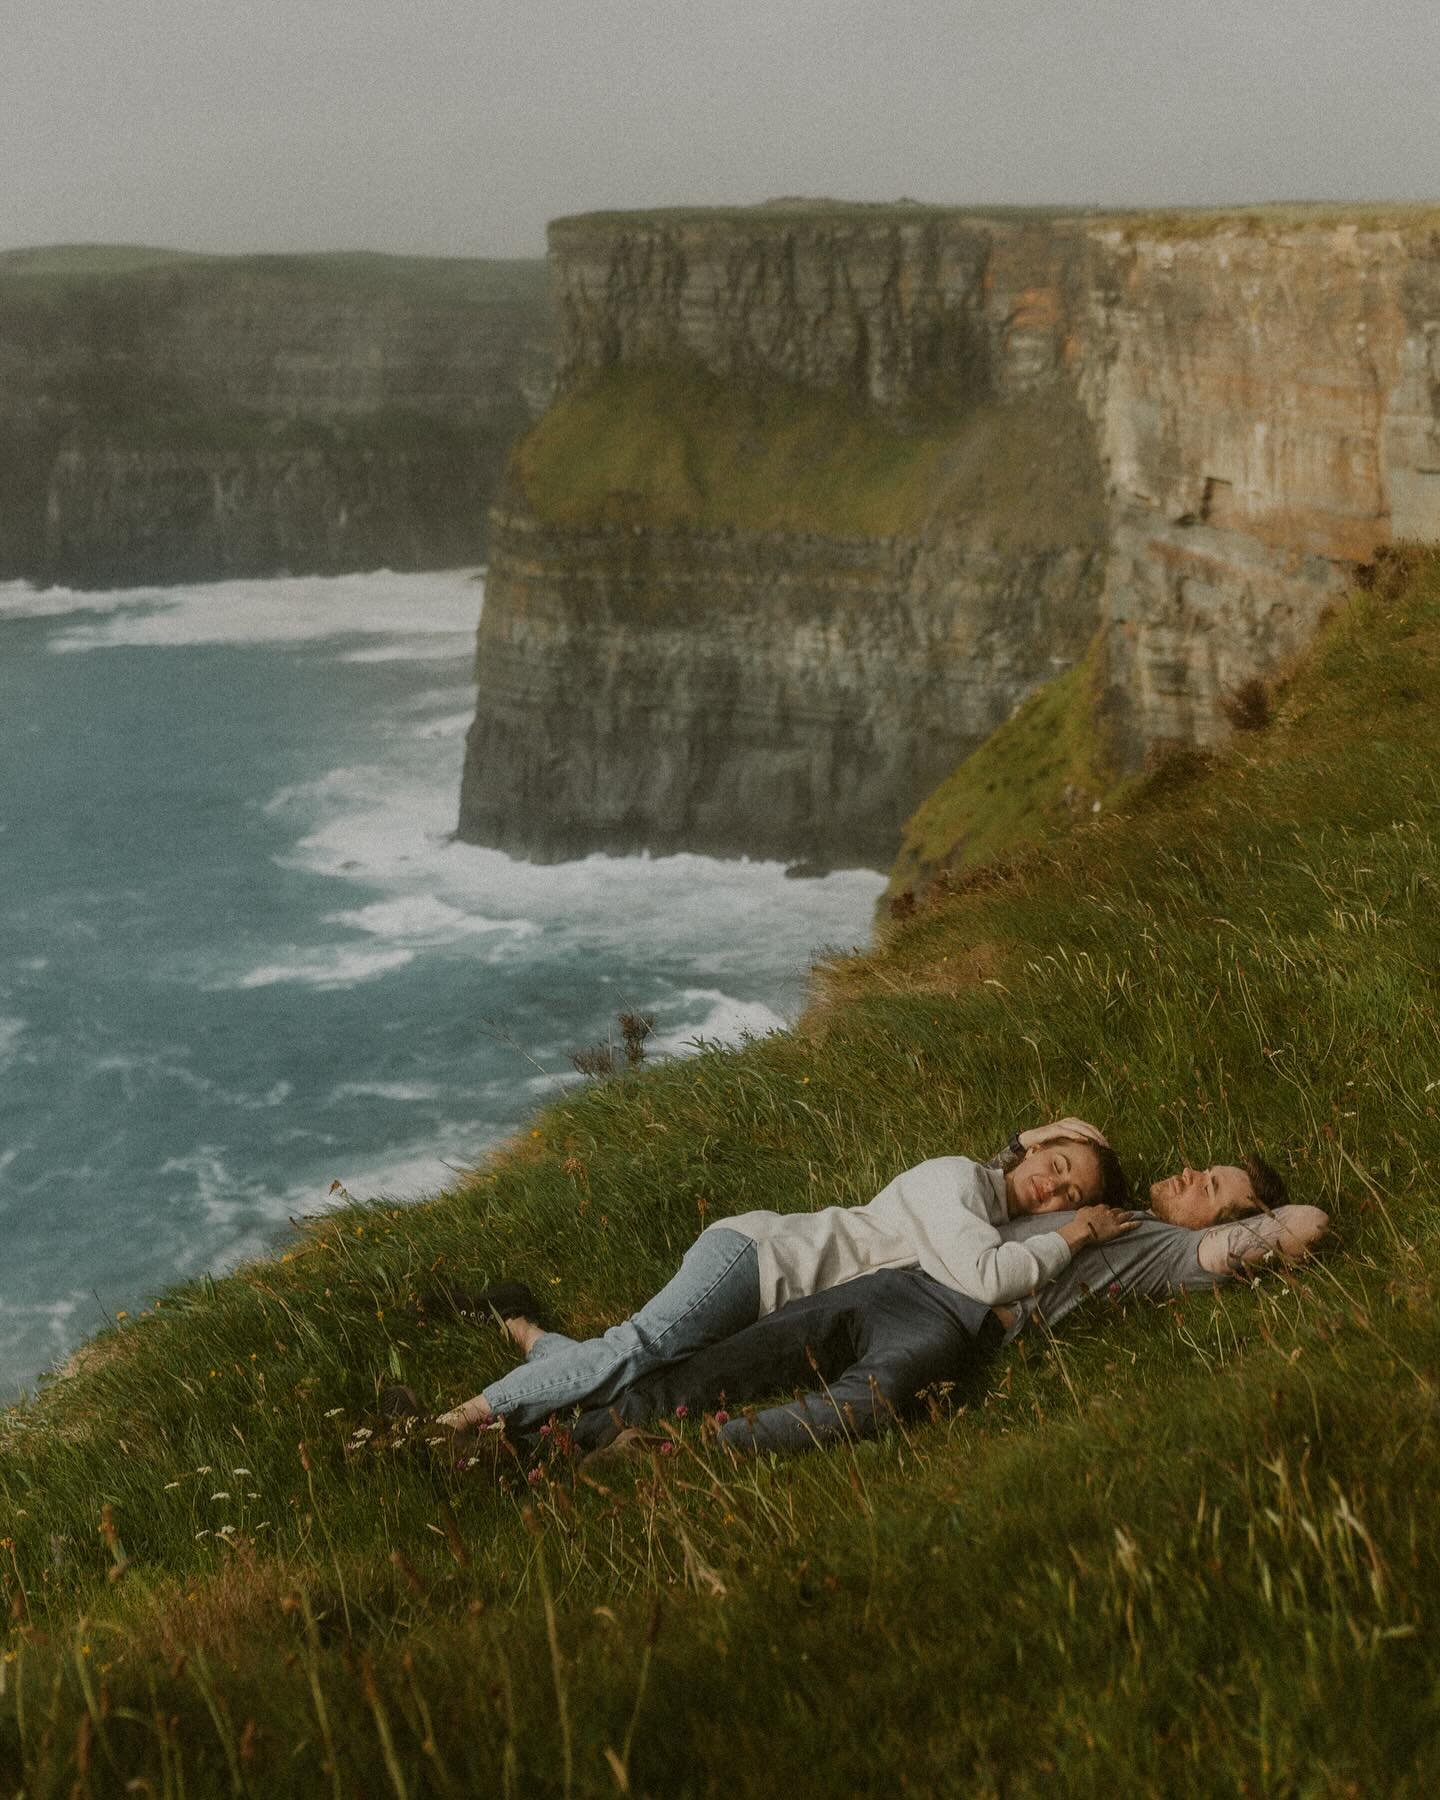 My first ever shoot at the Cliffs of Moher&mdash; one of those days that really empowered me to feel confident in my adaptability and technical skill to shoot in the international market. In my subscription account BEYOND, I&rsquo;m sharing in depth 